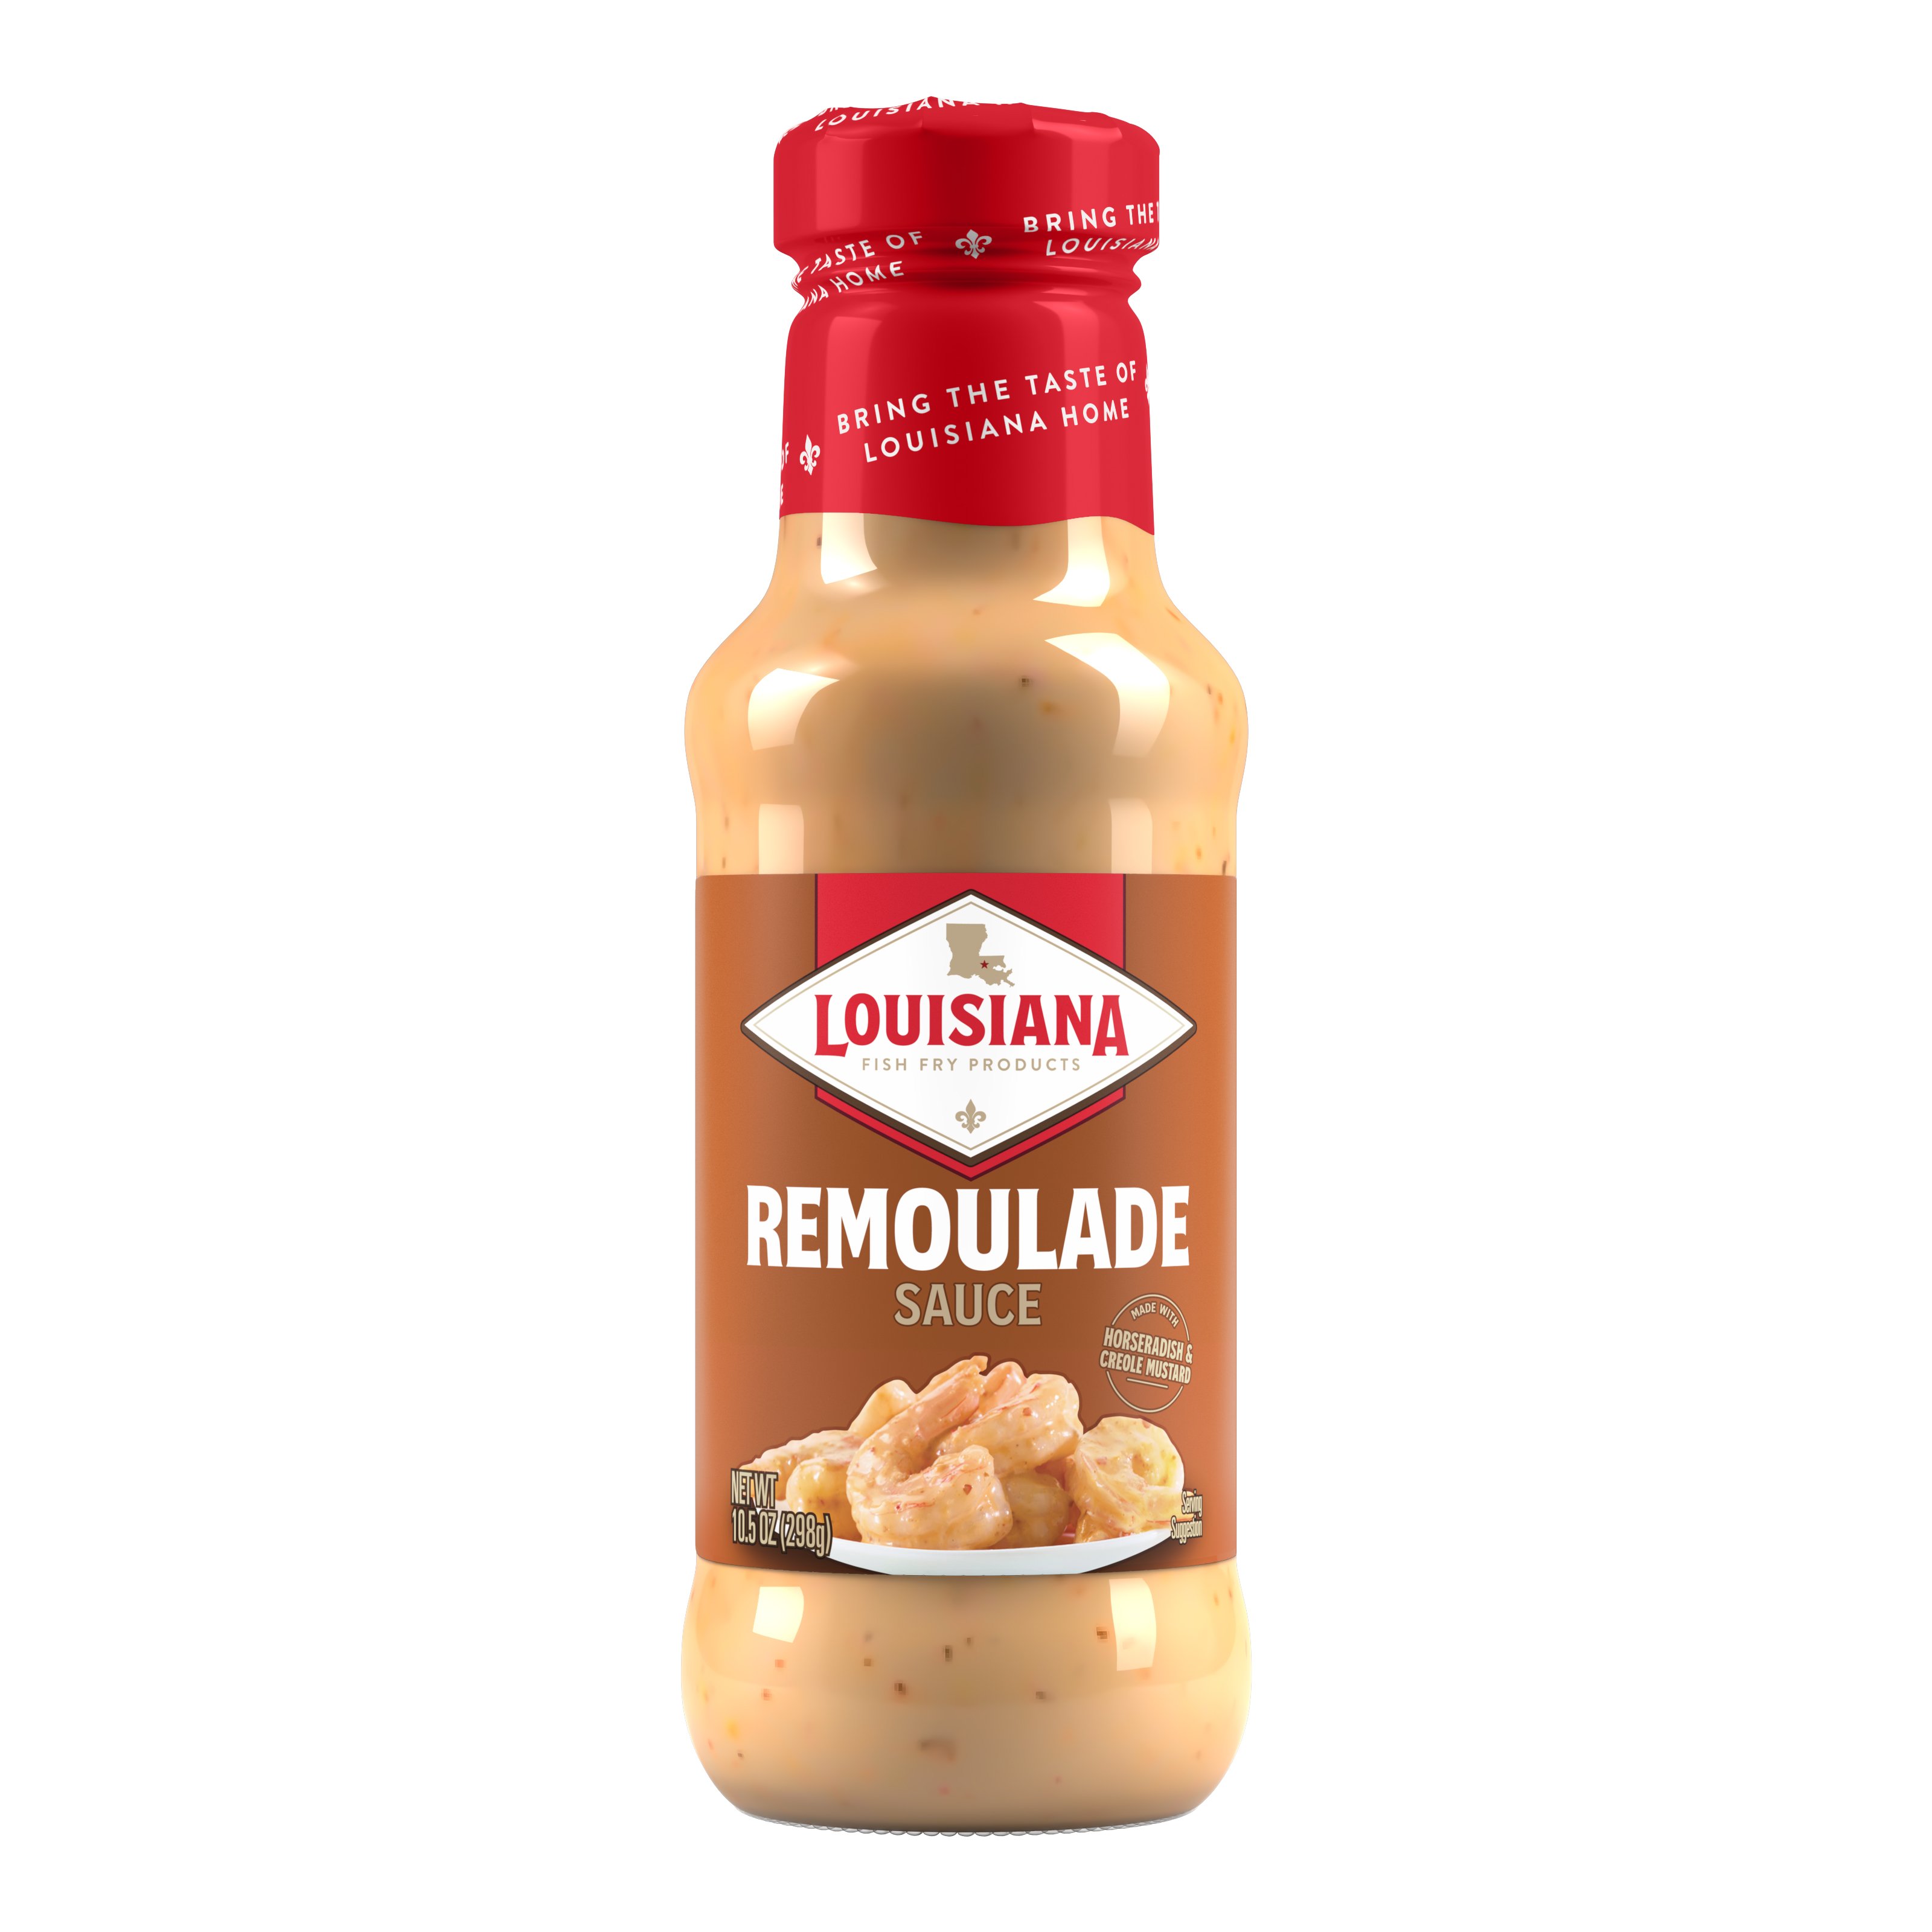 Louisiana Fish Fry Products Remoulade Sauce